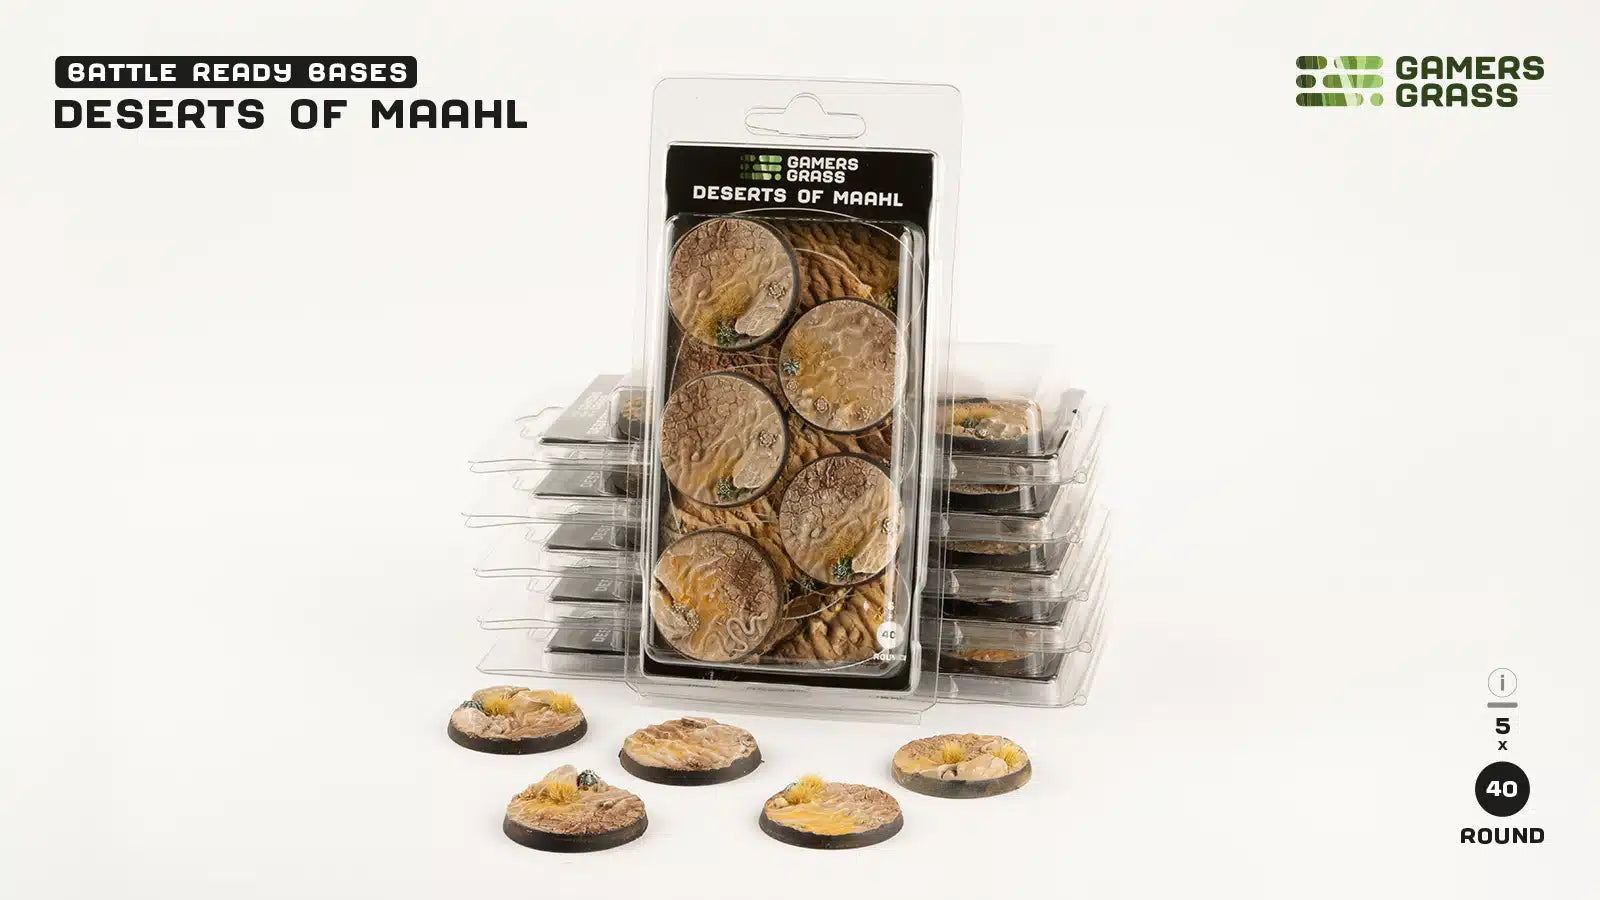 GamersGrass Battle Ready Bases: Deserts of Maahl - Round 40mm | Gauntlet Hobbies - Angola